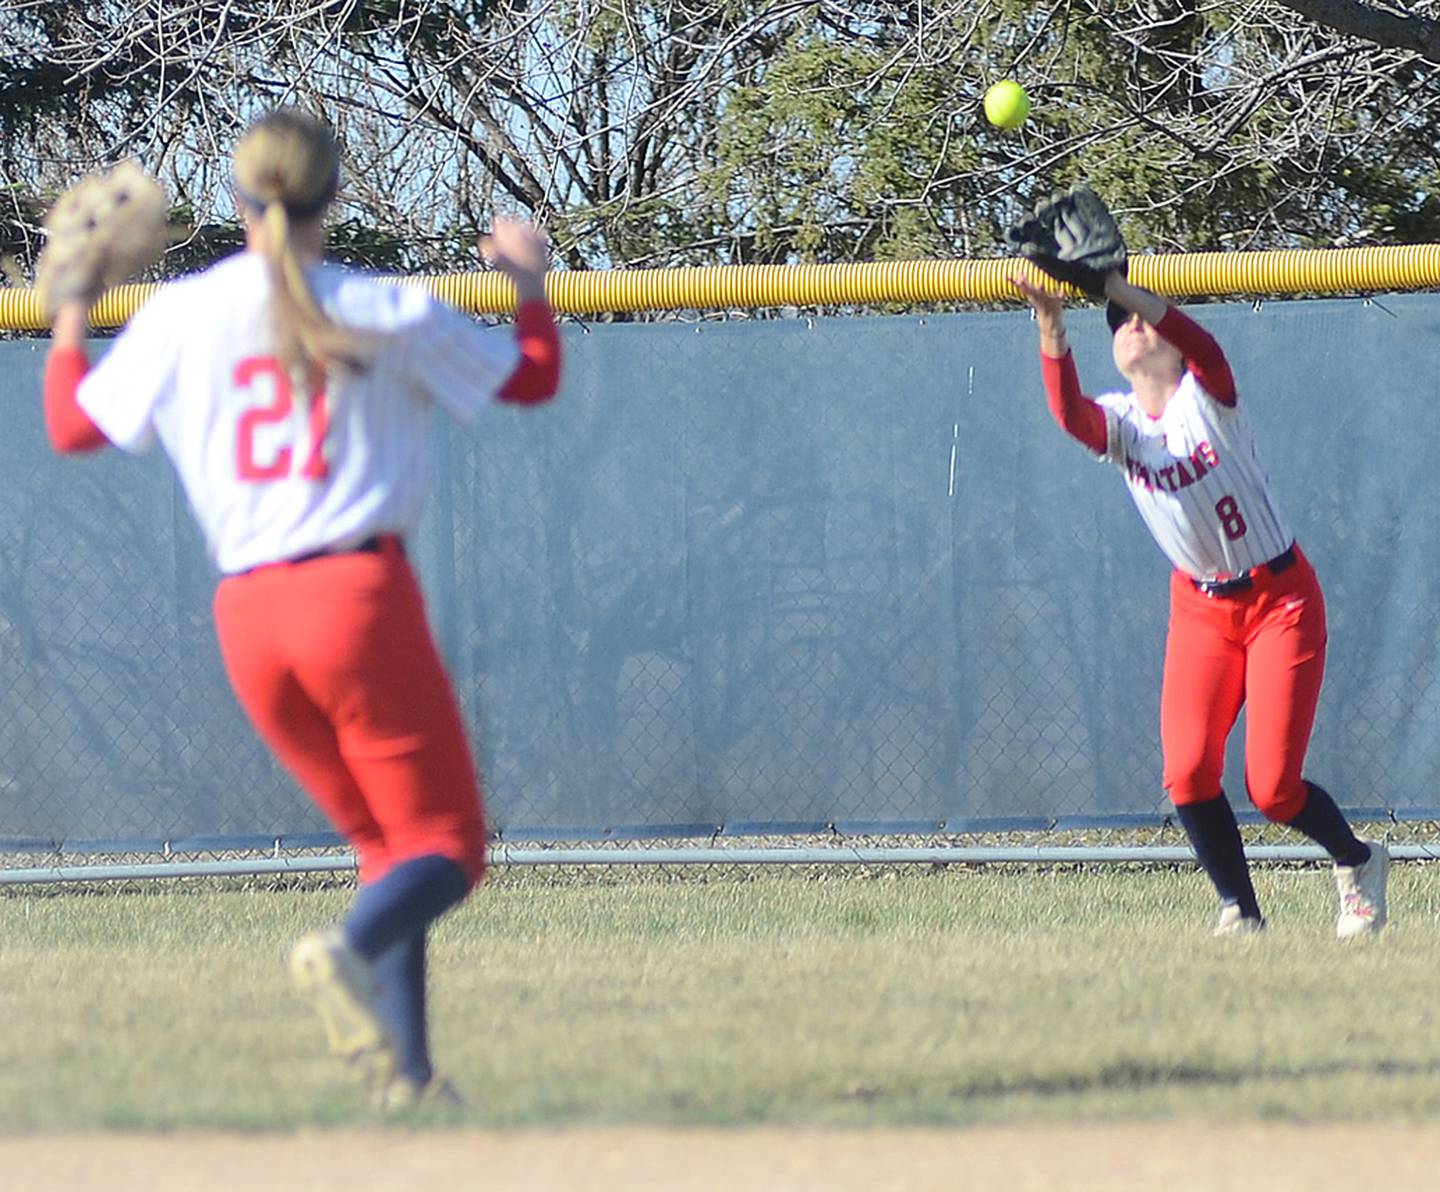 Outfielder Haley Meyer of Orient-Macksburg catches a flyball during SWCC's game two victory Tuesday. Meyer had two putouts in the 5-3 win.